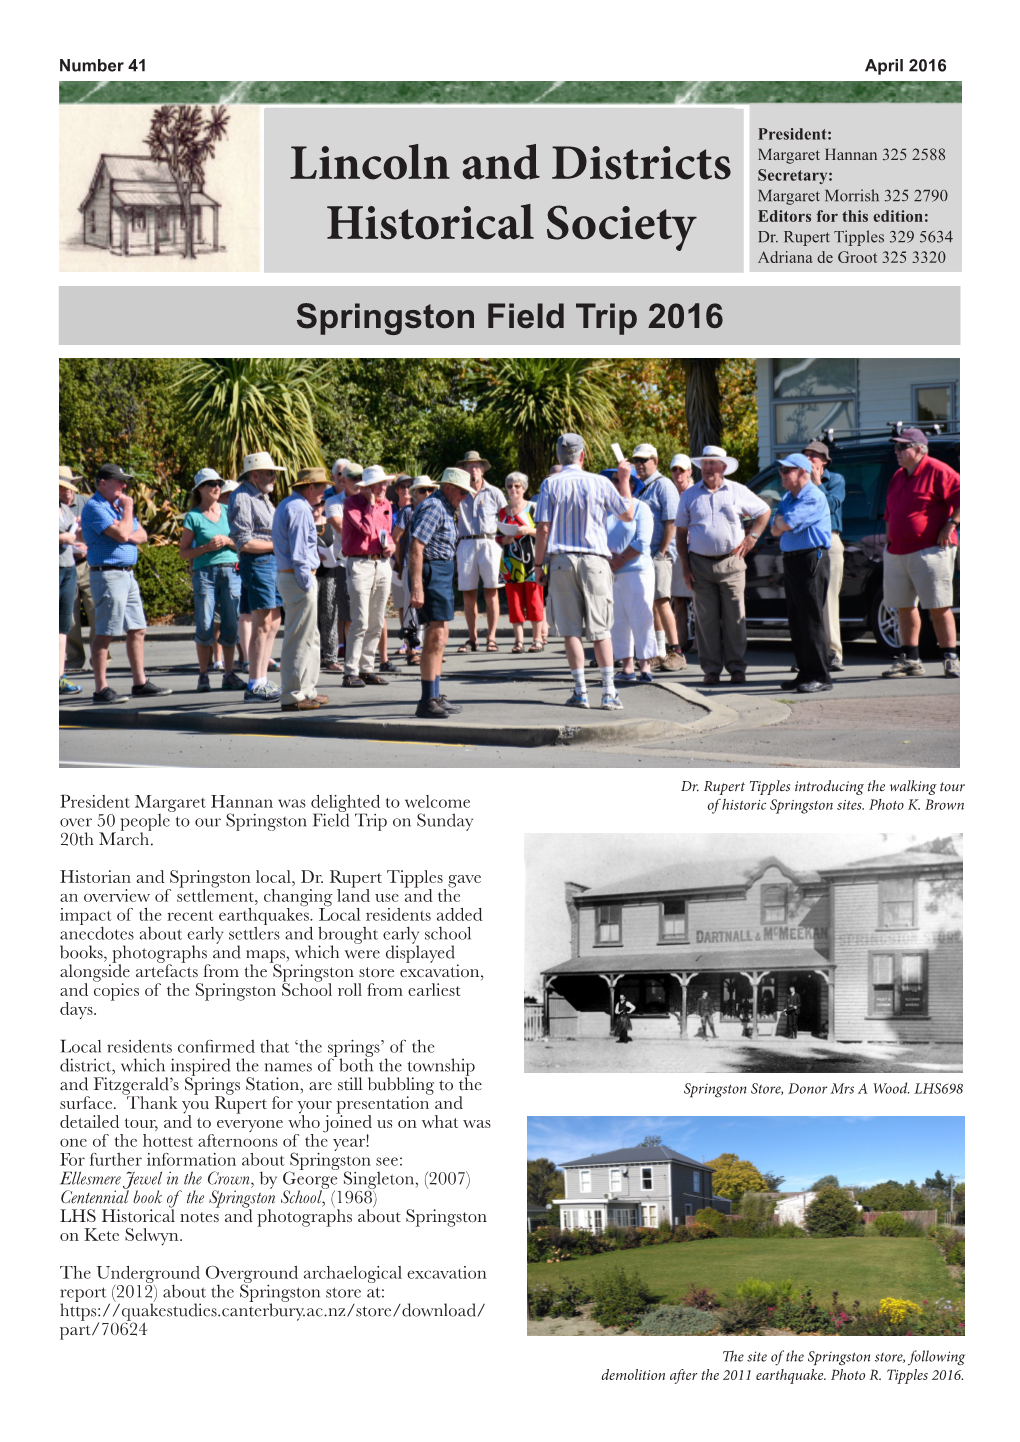 Lincoln and Districts Historical Society